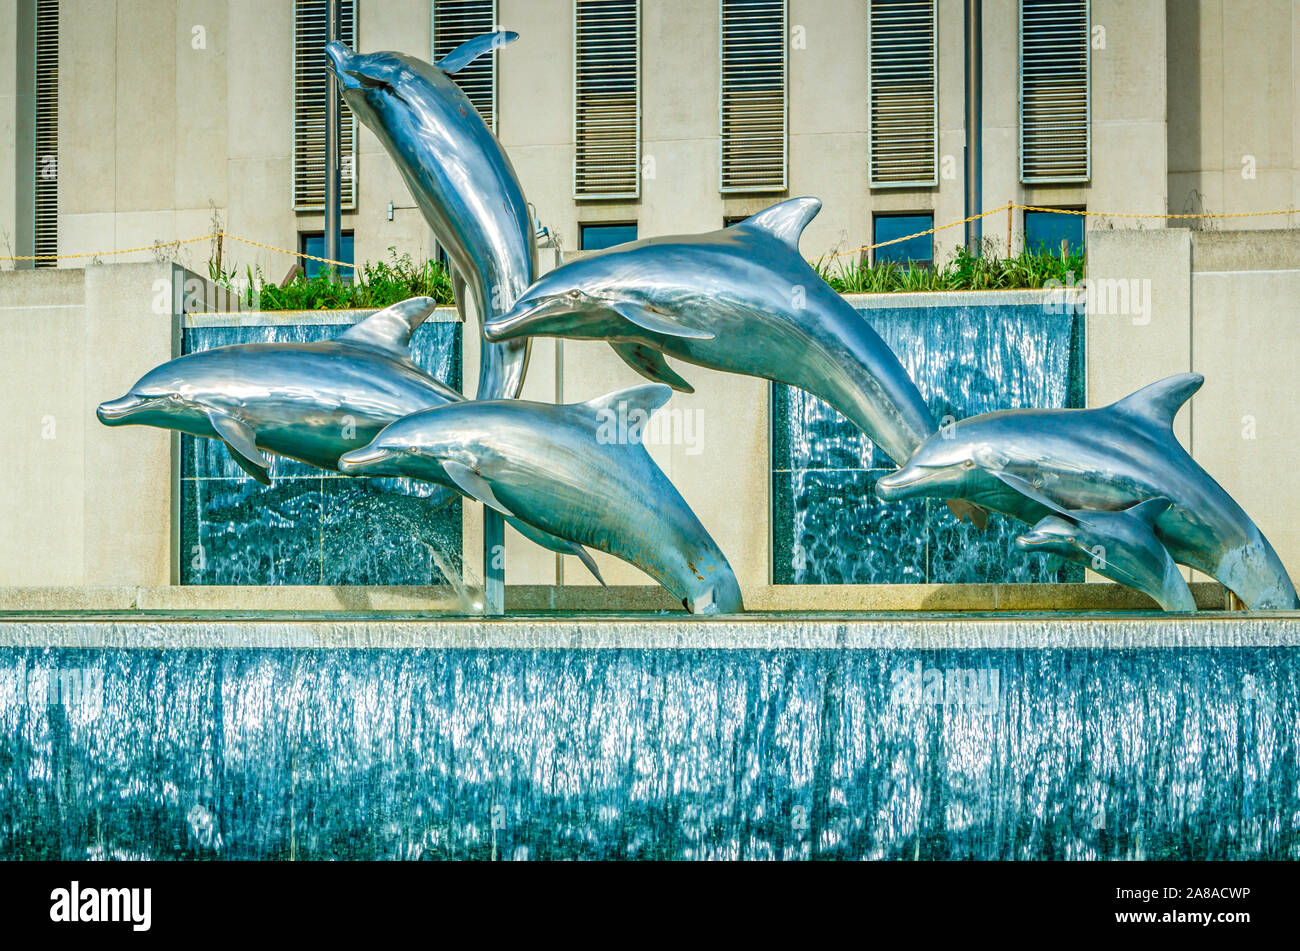 Dolphins frolic in Waller Park’s Florida Heritage Fountain at the Florida State Capitol, July 20, 2013, in Tallahassee, Florida. Stock Photo